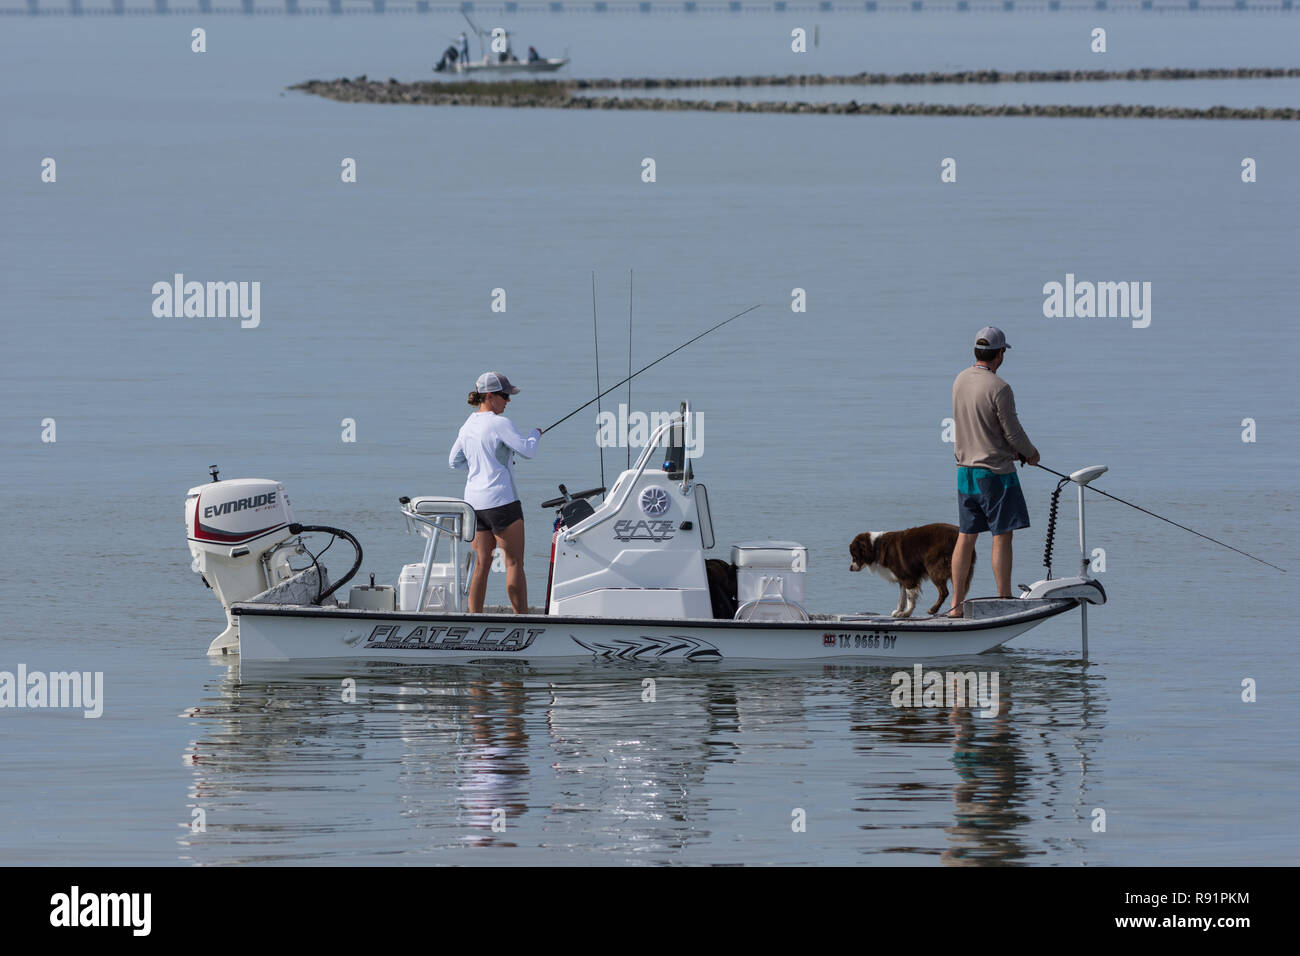 A couple fishing on a boat with their dog. Aransas National Wildlife Refuge, Texas, USA. Stock Photo